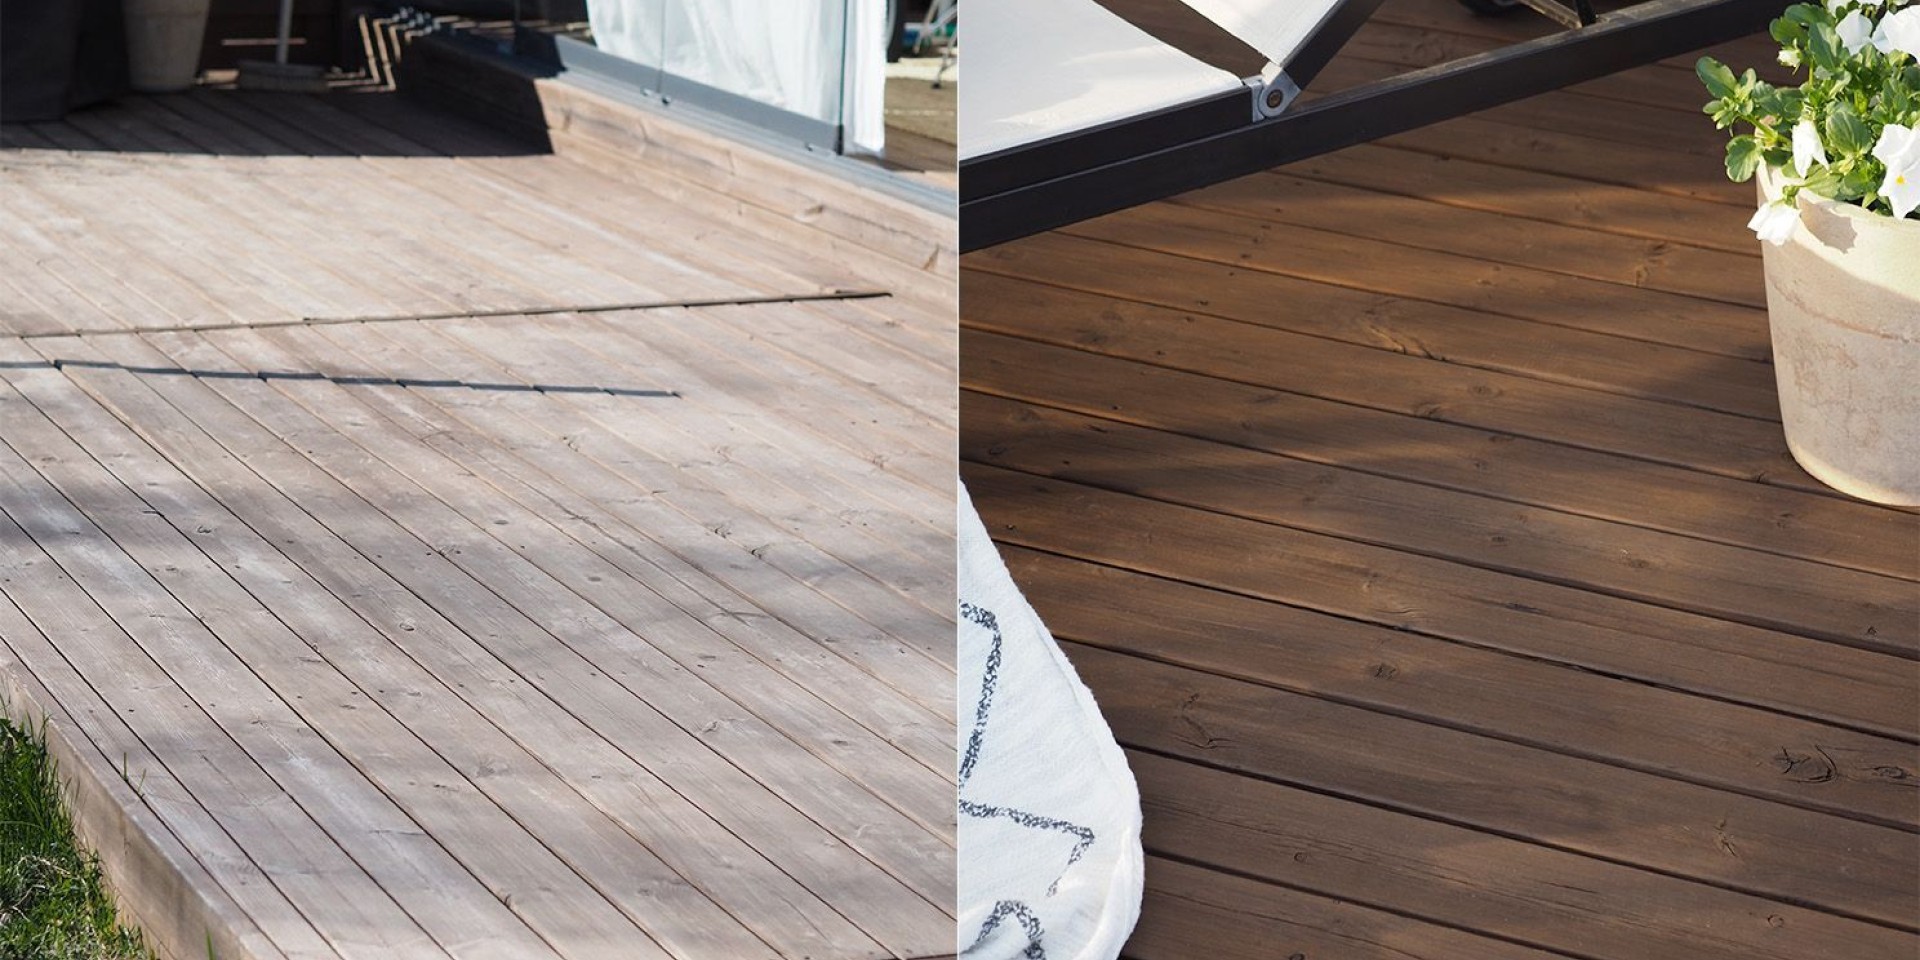 Dry and worn out terrace before and after oiling